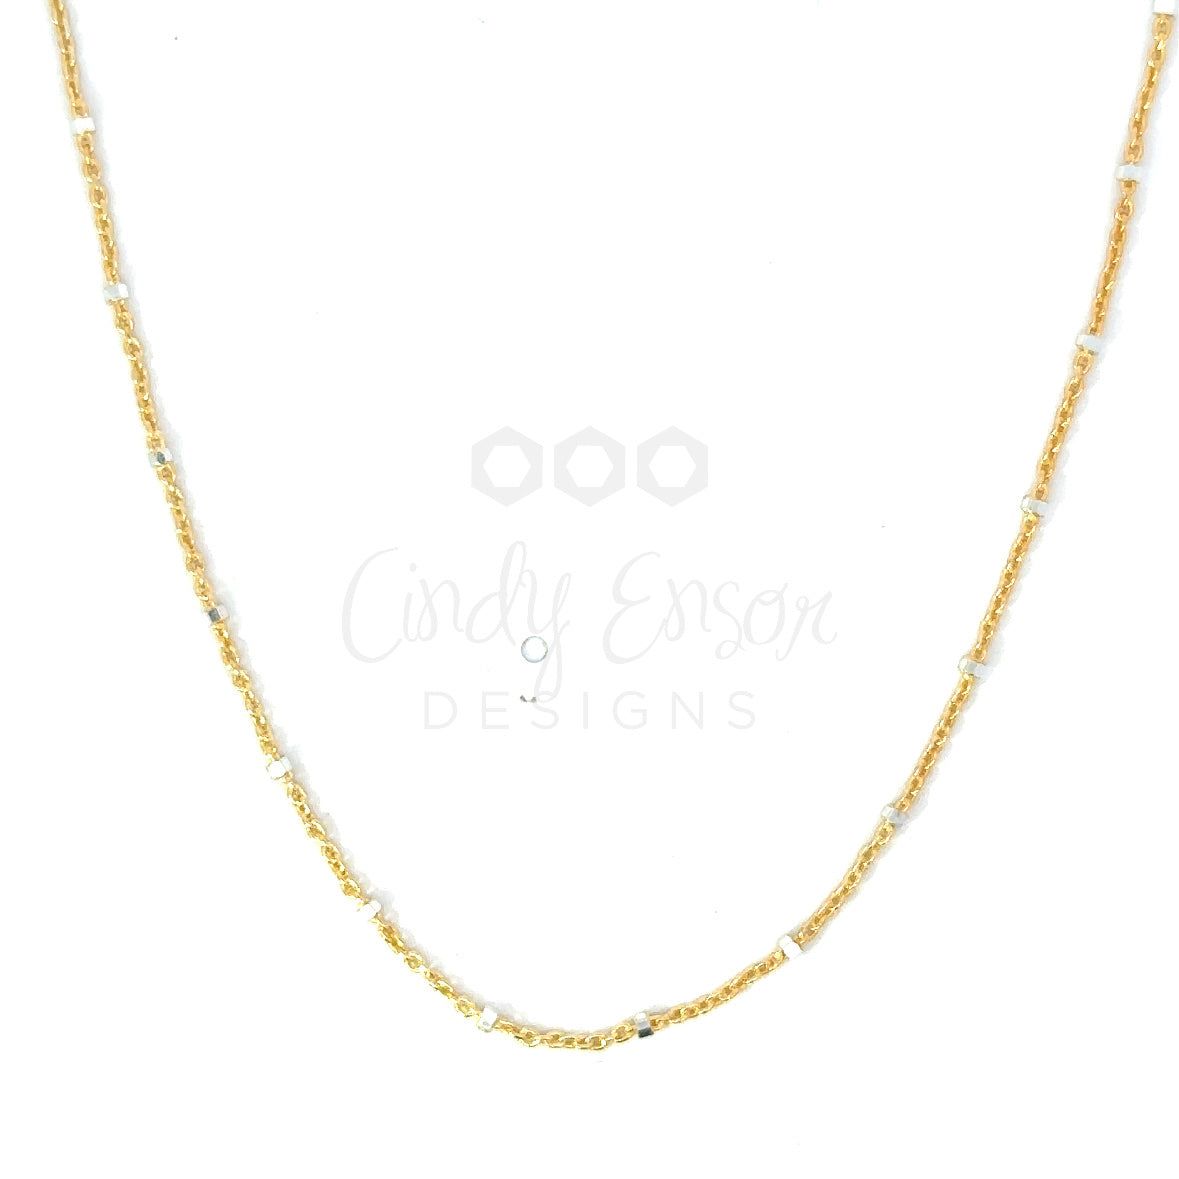 Gold Filled 18" Bead Ball Chain